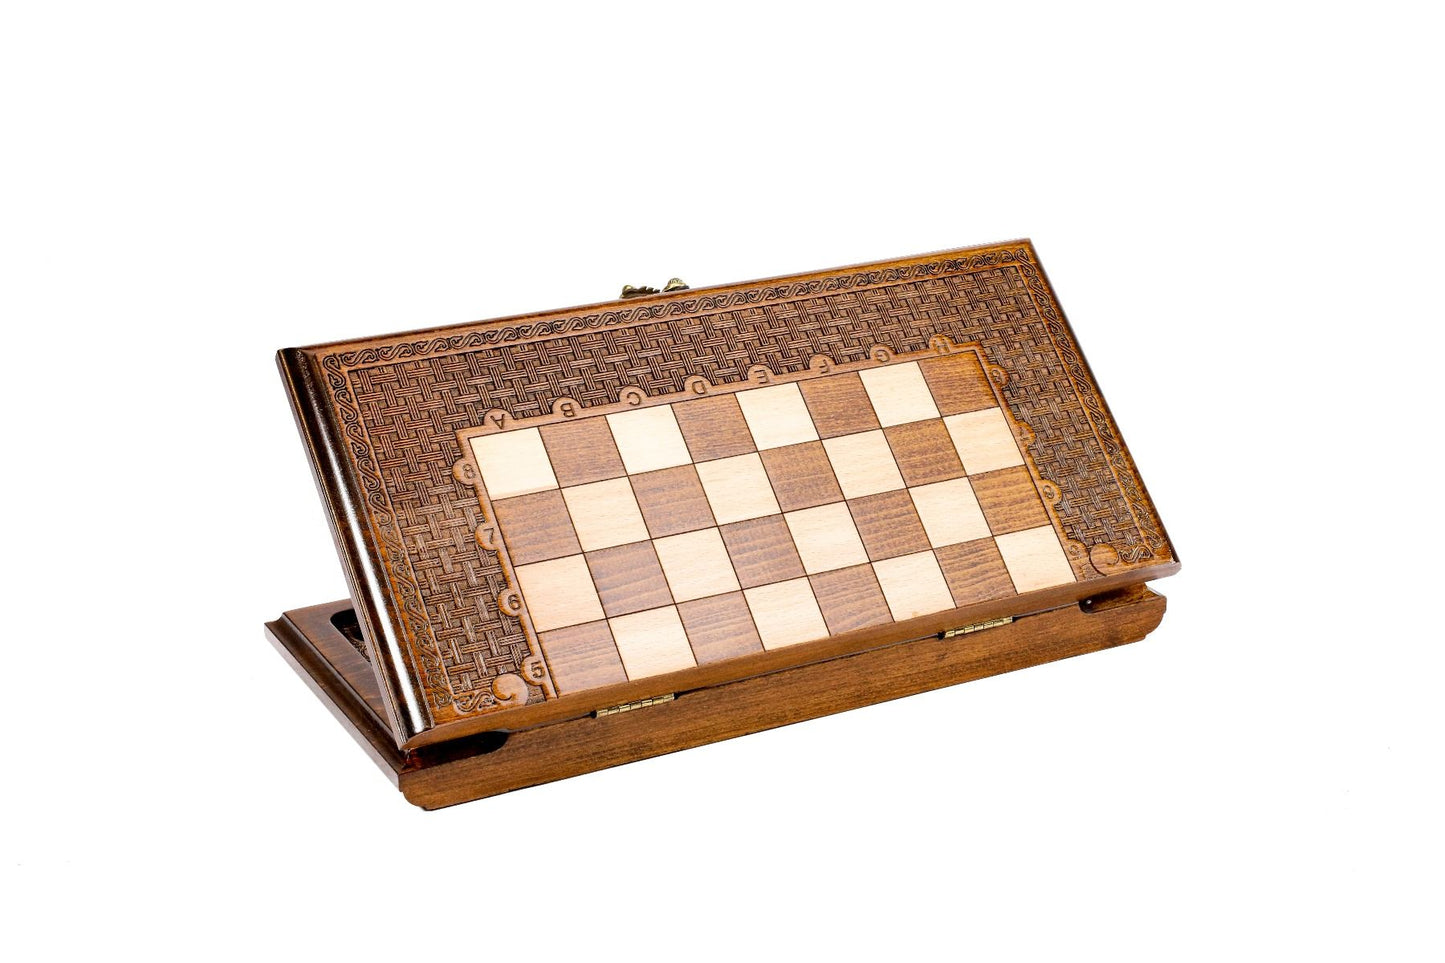 Engage in the art of strategy with a dual-game set, where the craftsmanship of chess meets the classic play of backgammon in artisanal elegance.